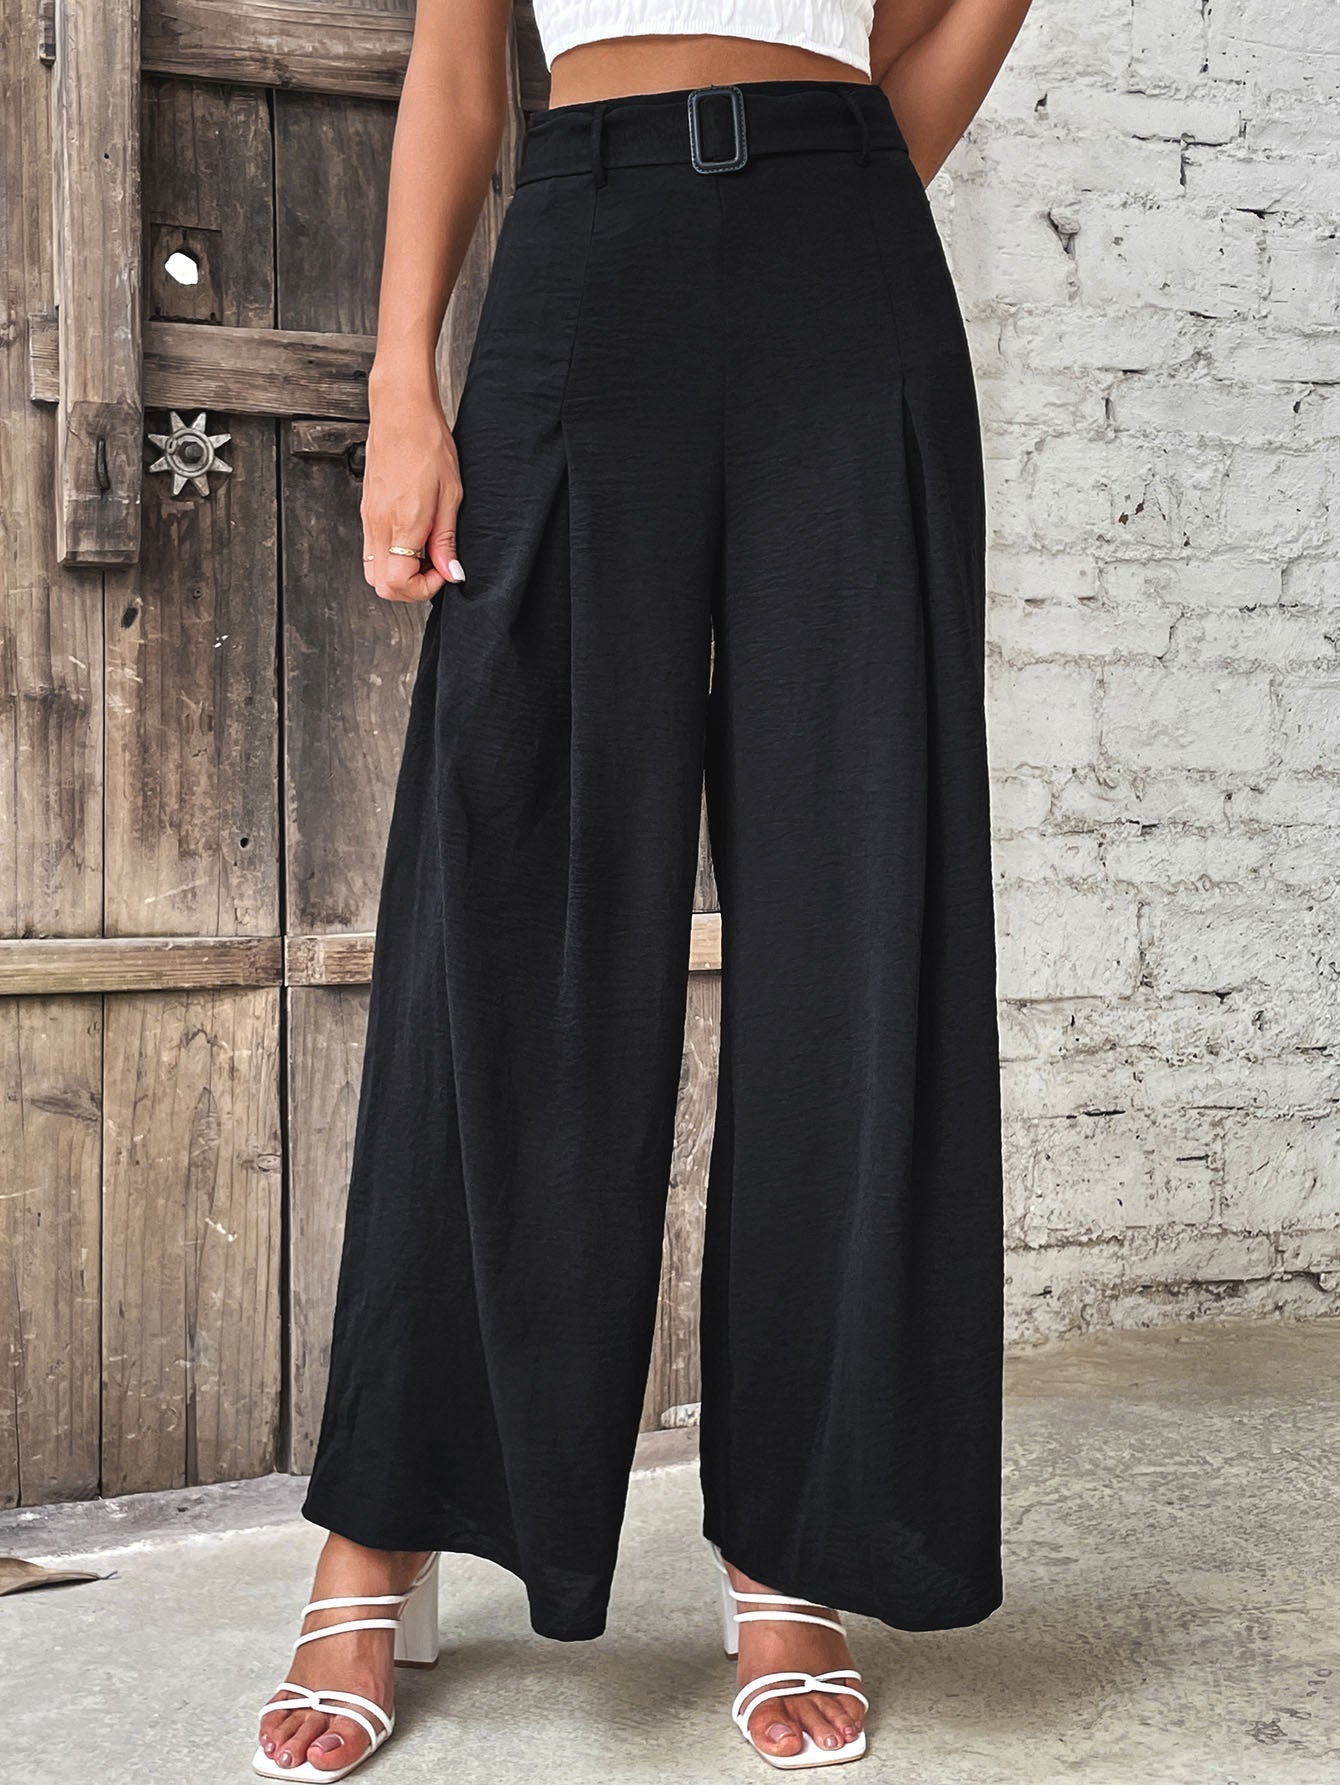 Ruched High Waist Wide Leg Pants Print on any thing USA/STOD clothes